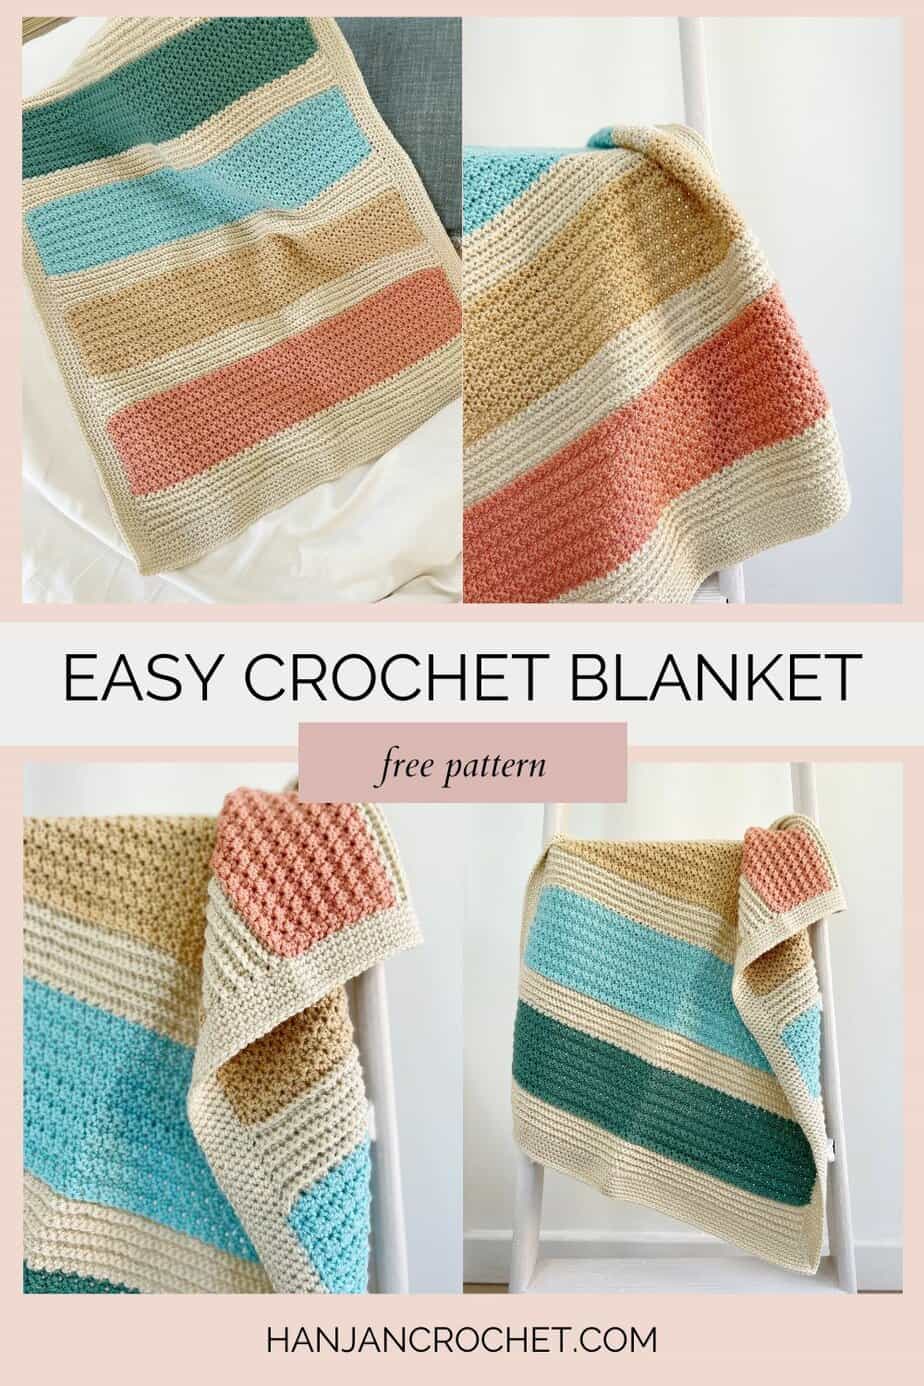 Four images of striped crochet blanket.